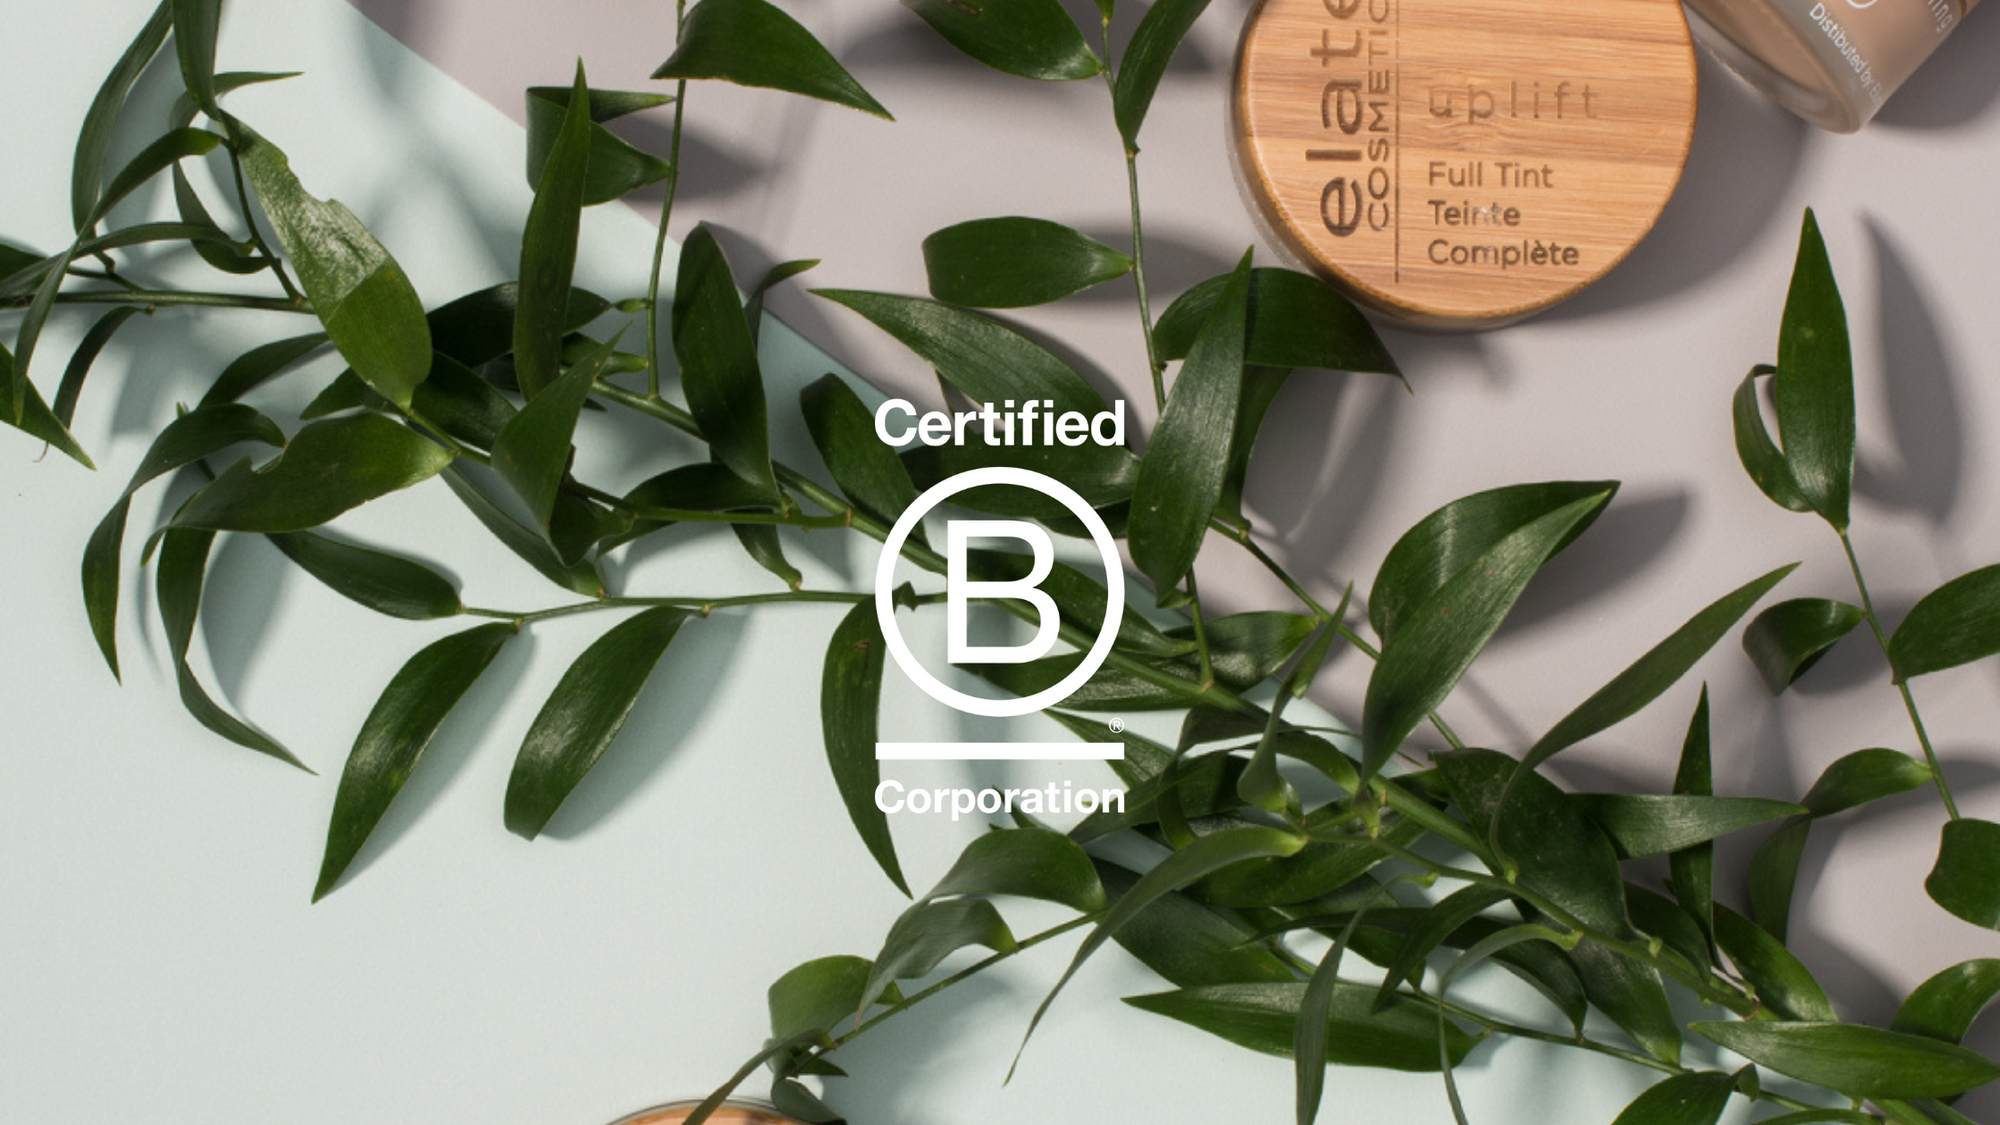 Elate is a B-Corporation!